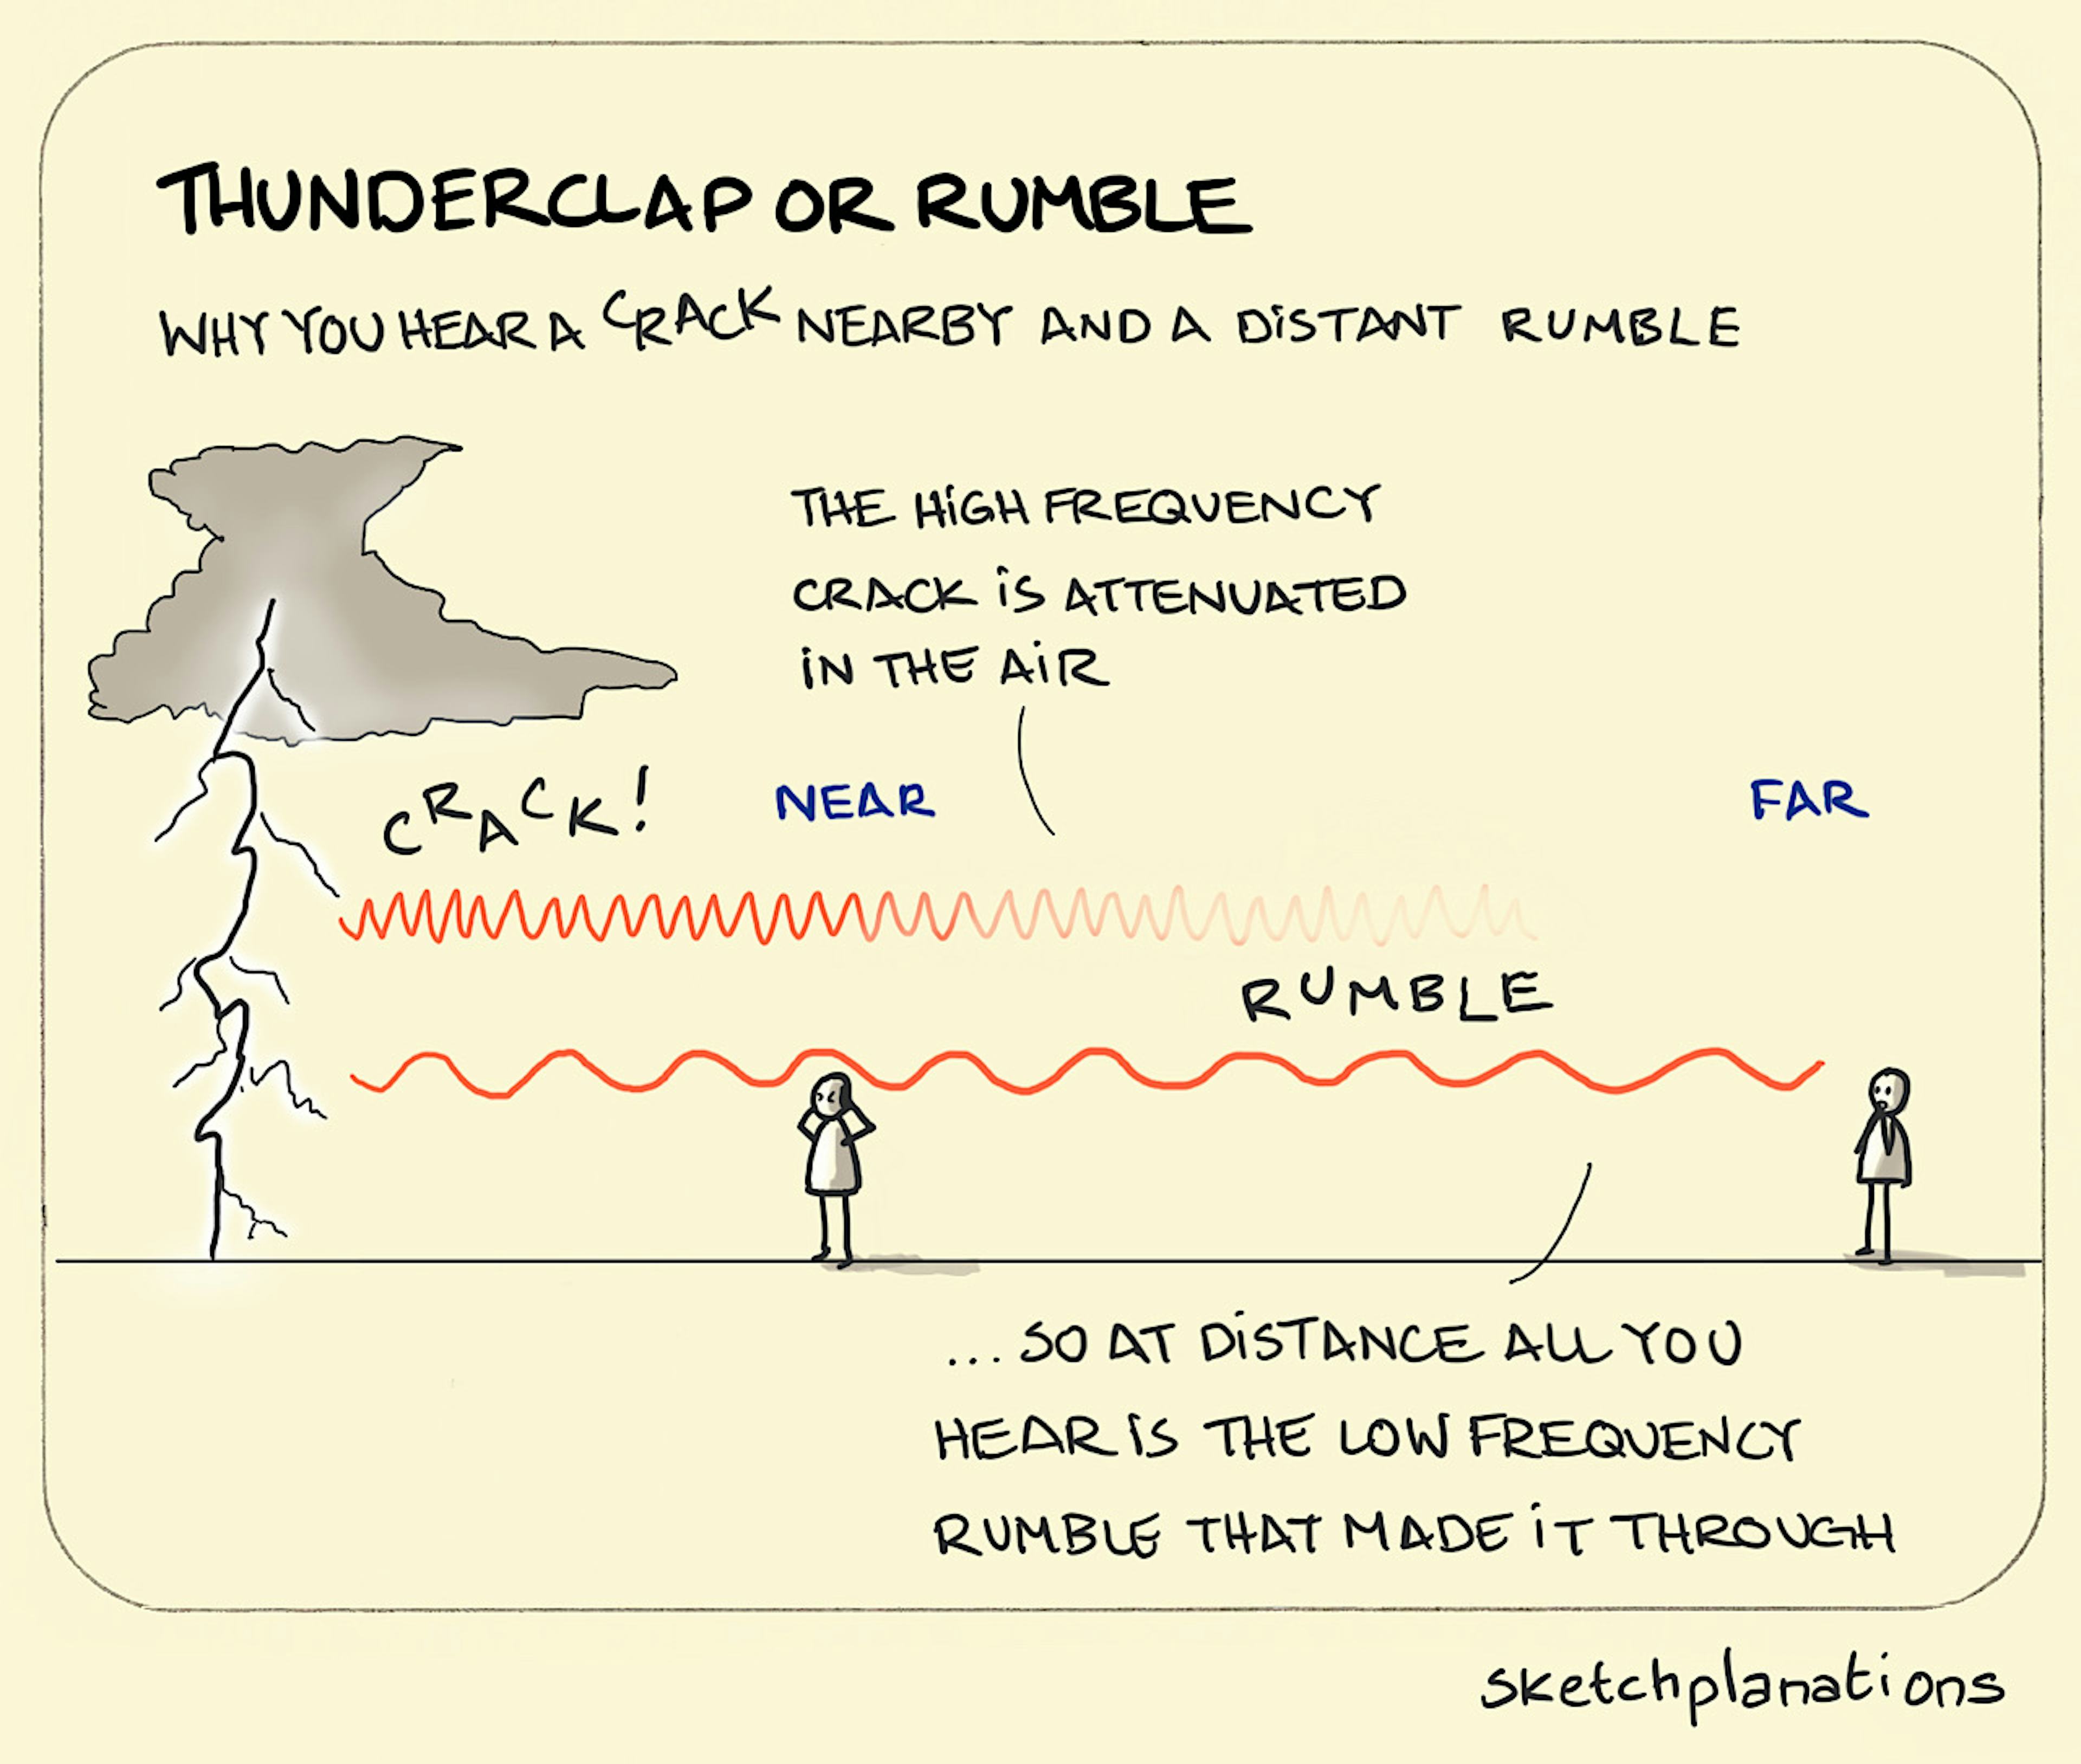 Thunderclap or Rumble illustration: a dark, menacing cloud produces a lightening strike, creating a high frequency sound wave that gradually dissipates the further away you get. 